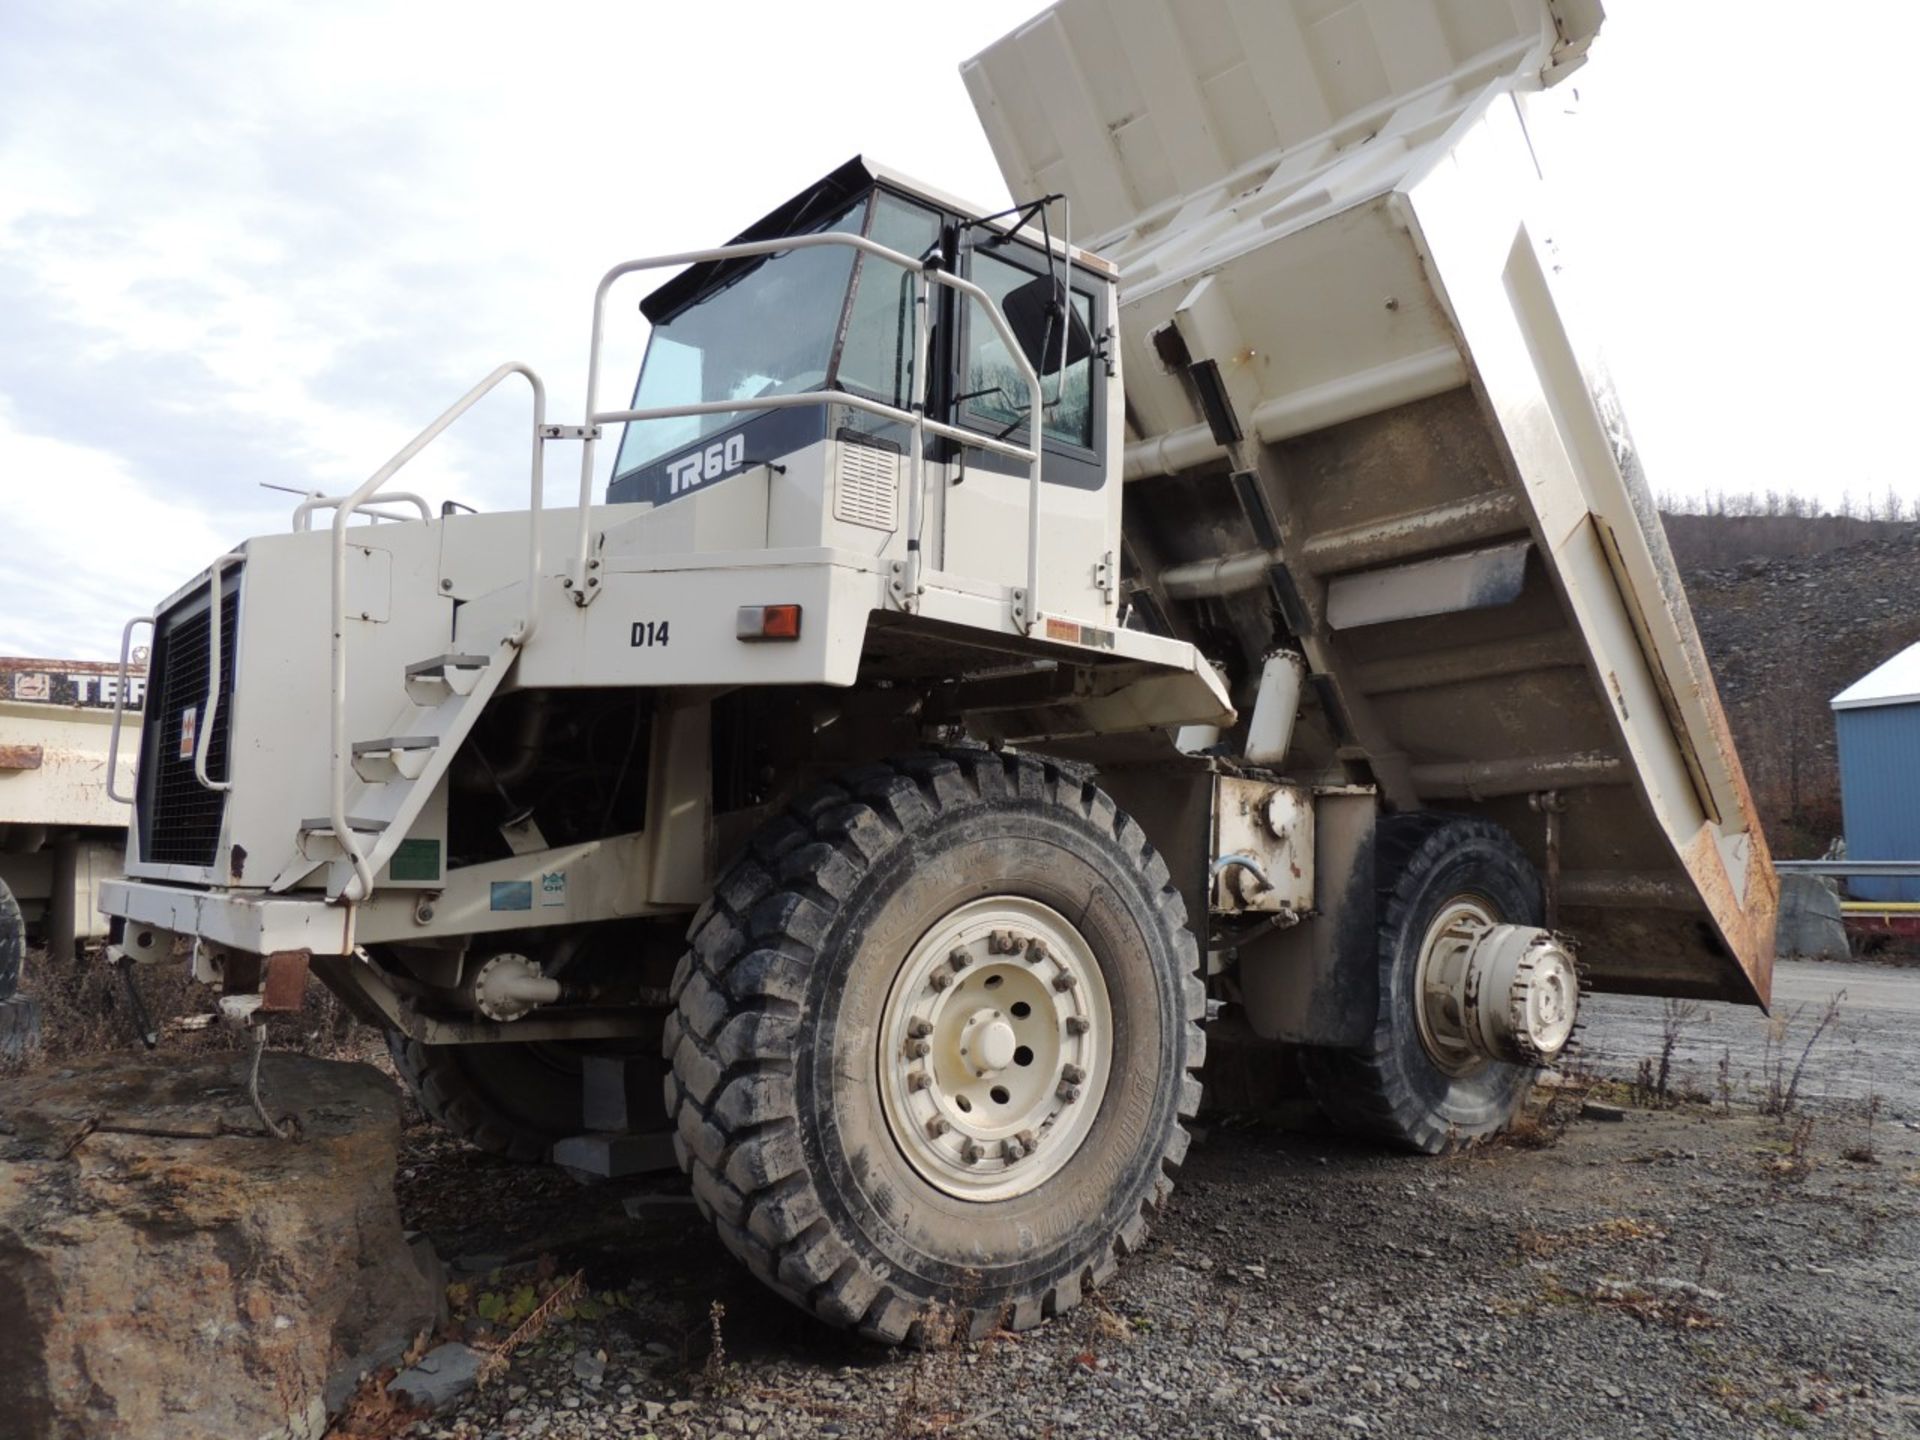 Terex TR60 Rock Truck, 2006 Year, S/N T8391222 - Image 3 of 9